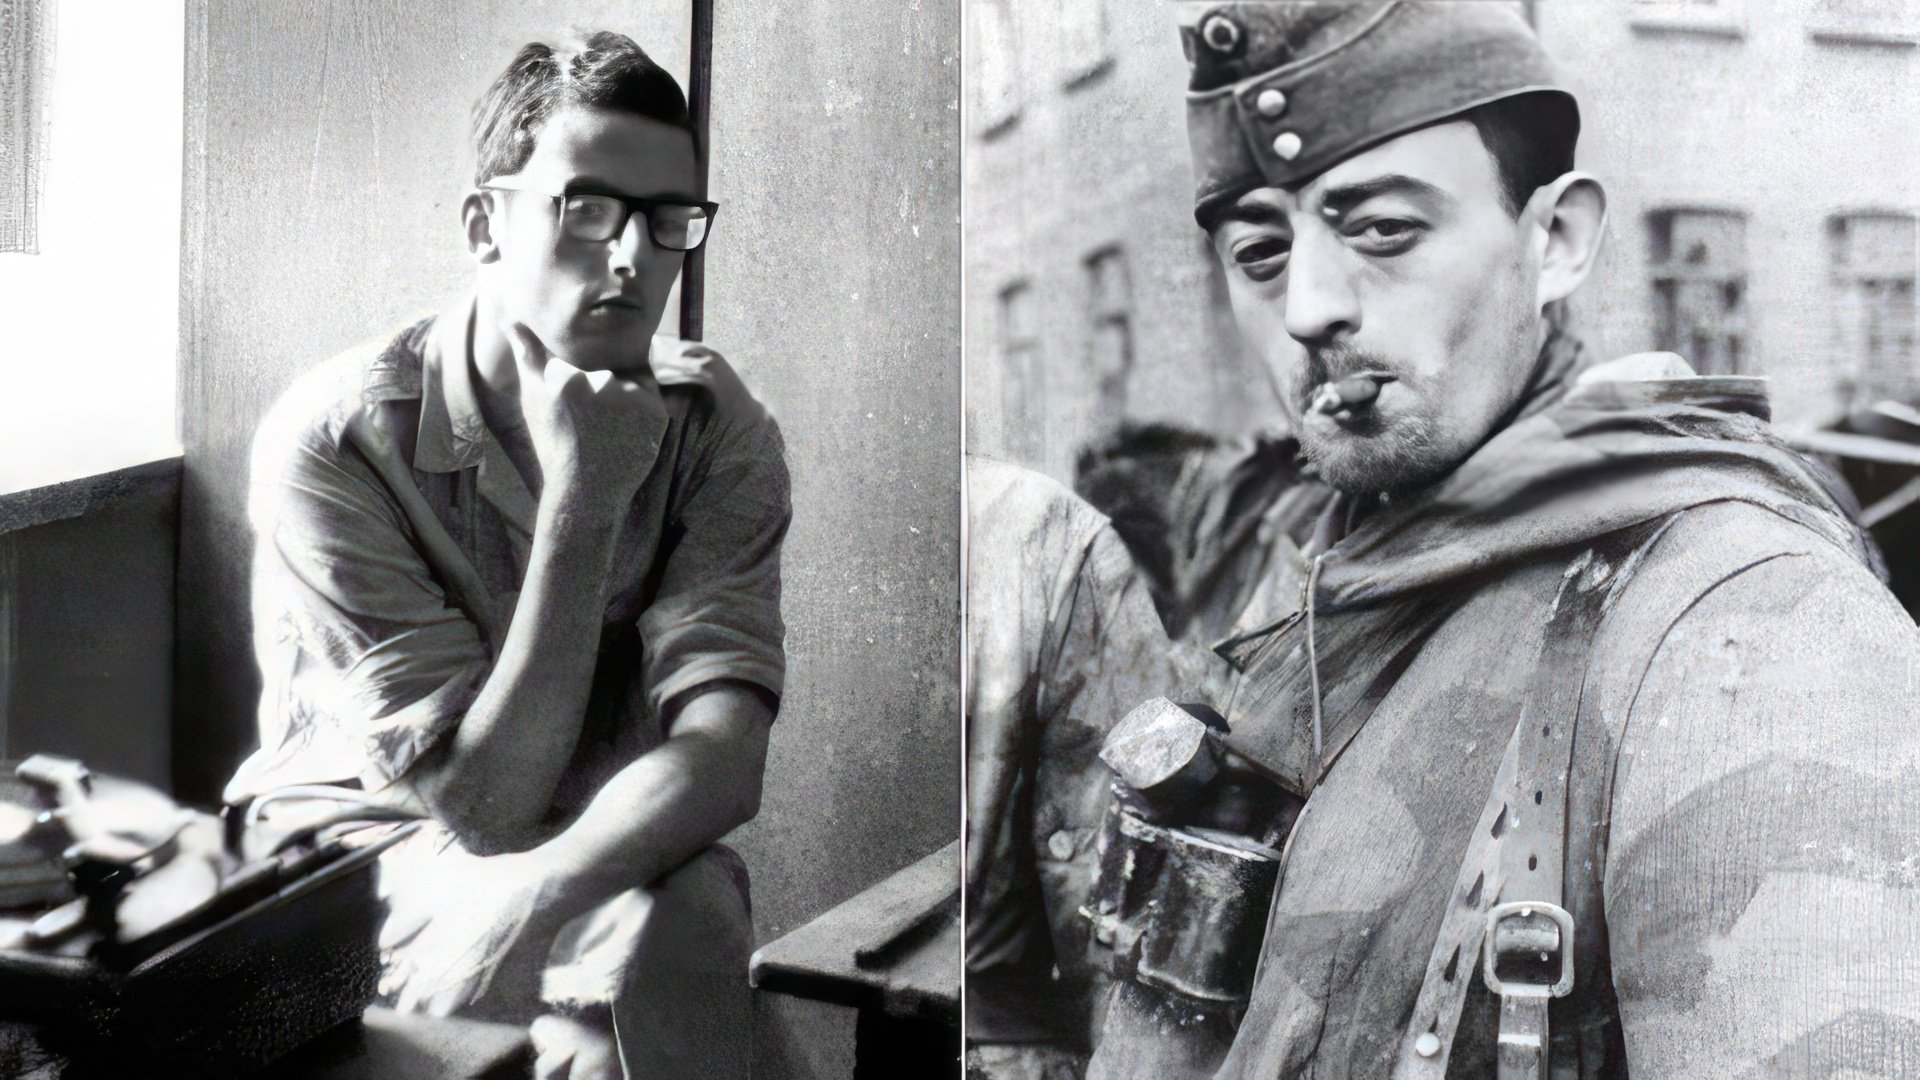 Jean Reno served in the French army for French citizenship